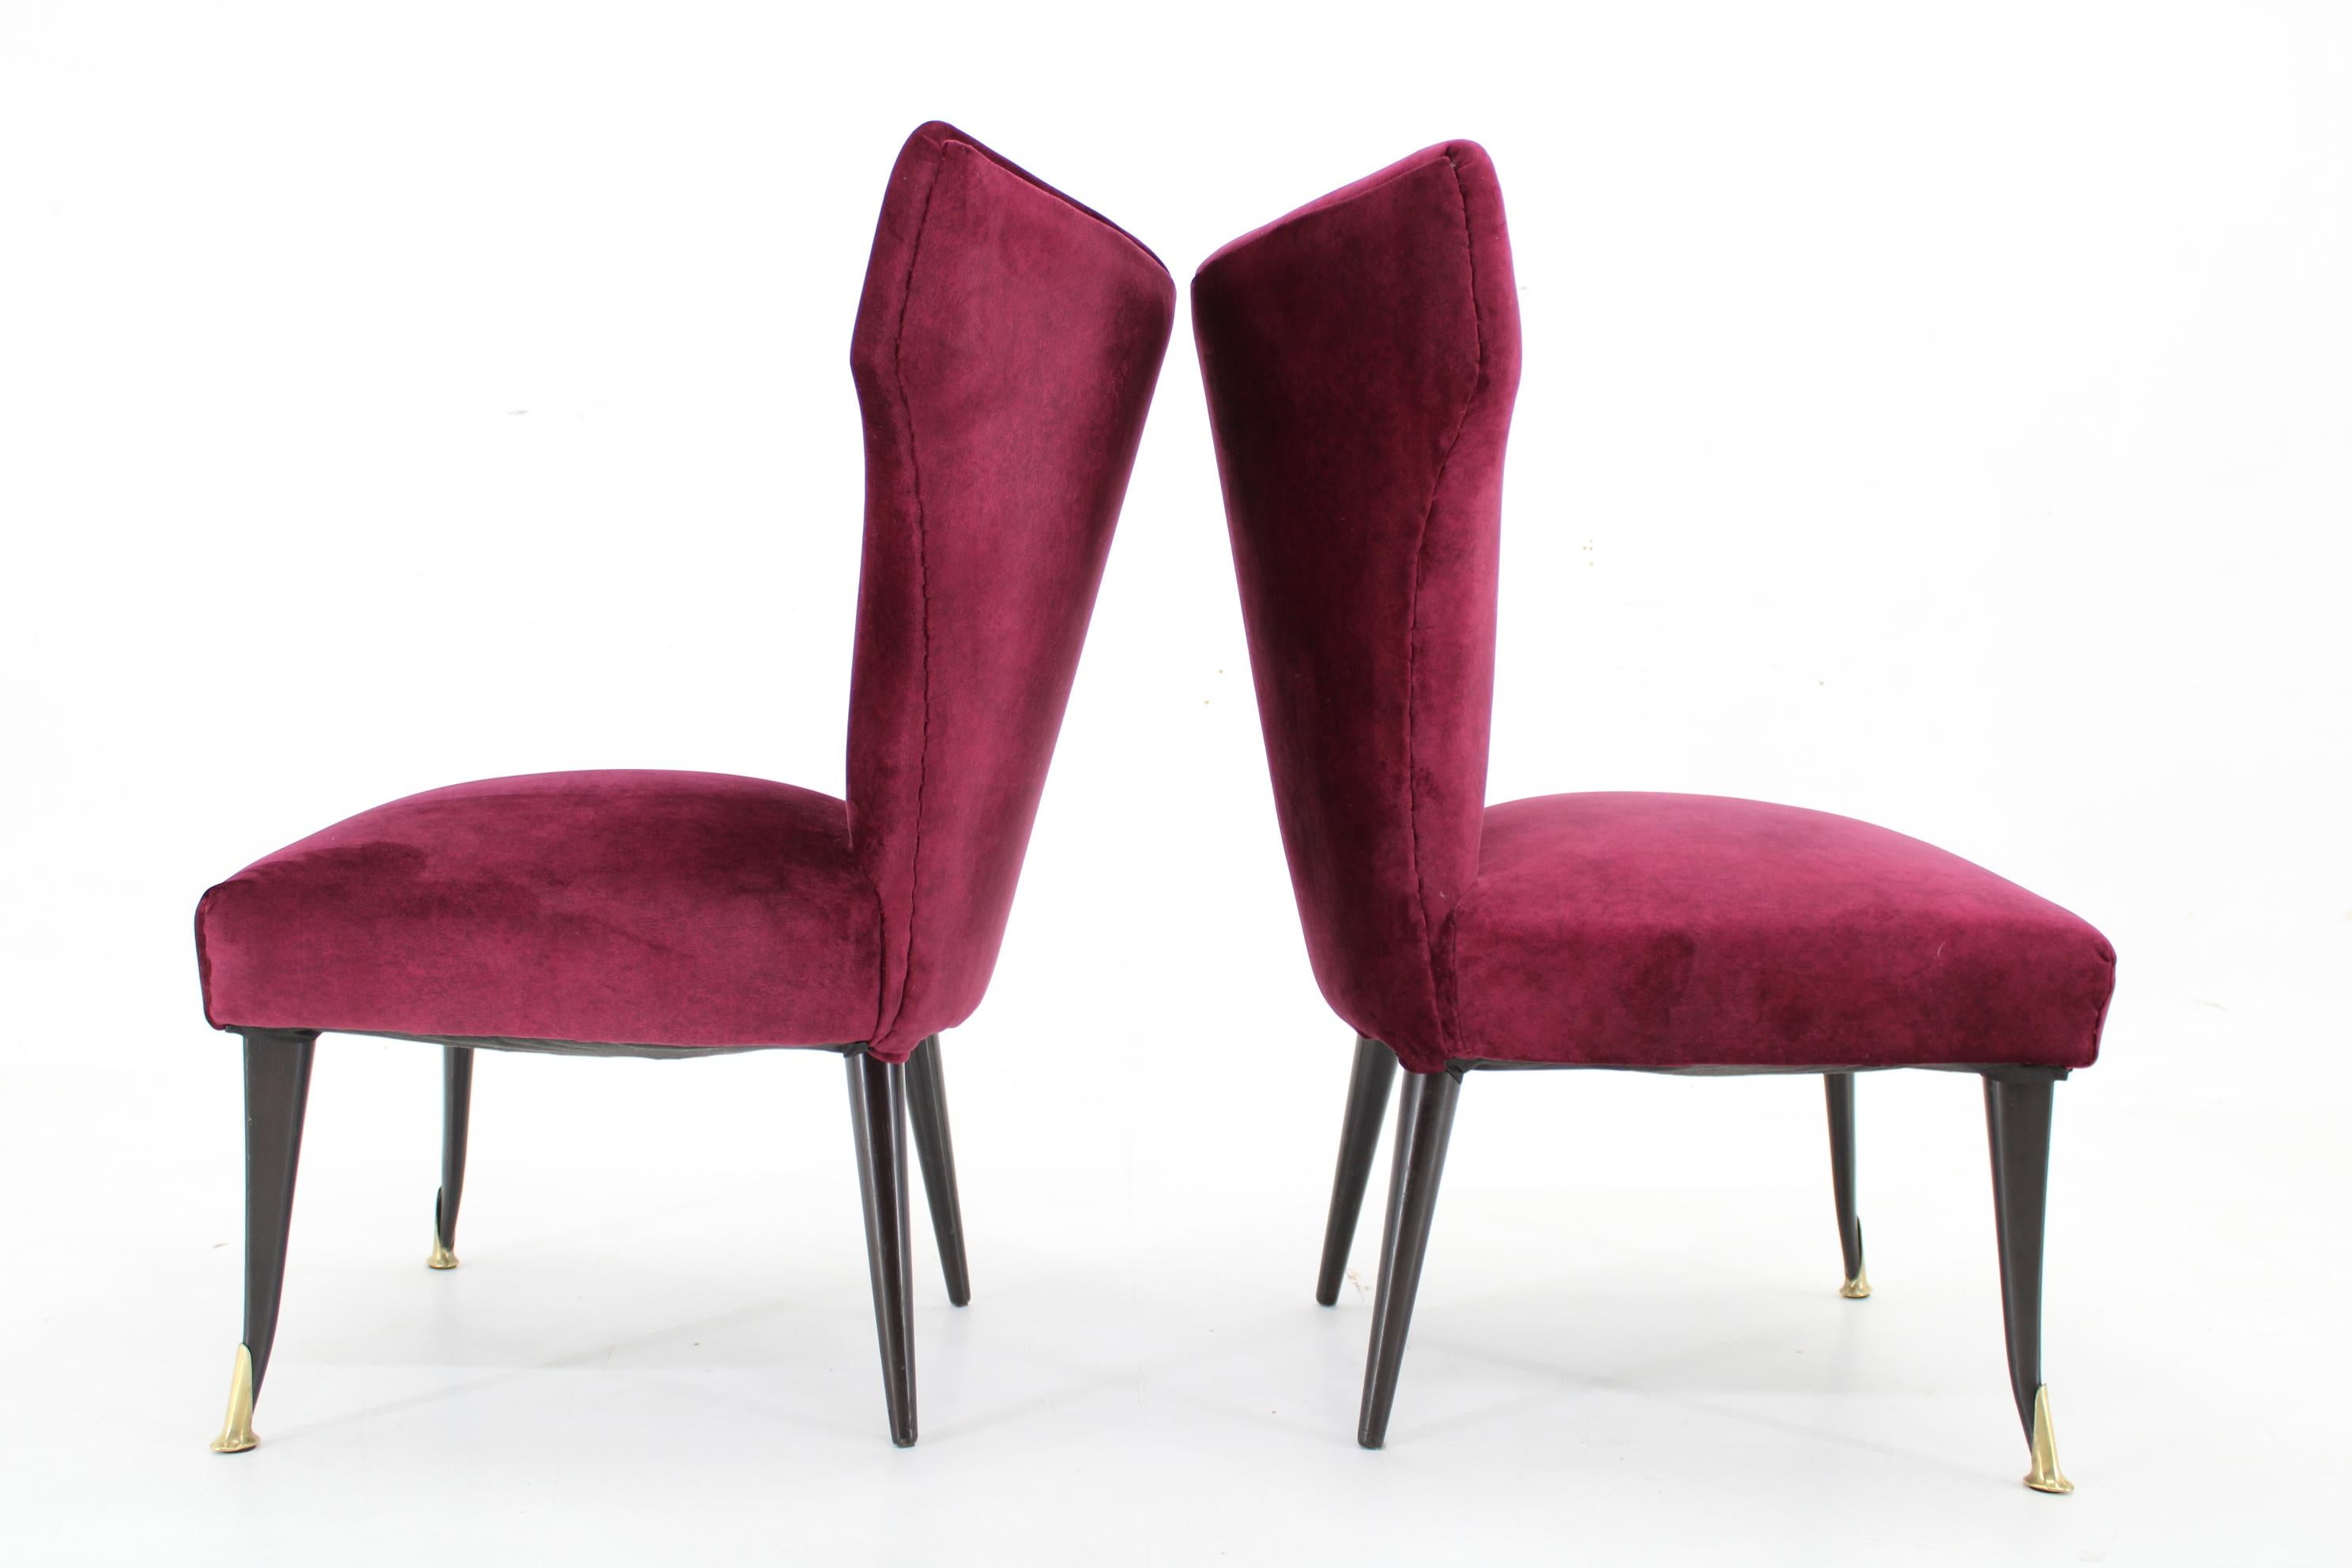 Mid-20th Century 1950s Pair of Italian Chairs, Restored For Sale